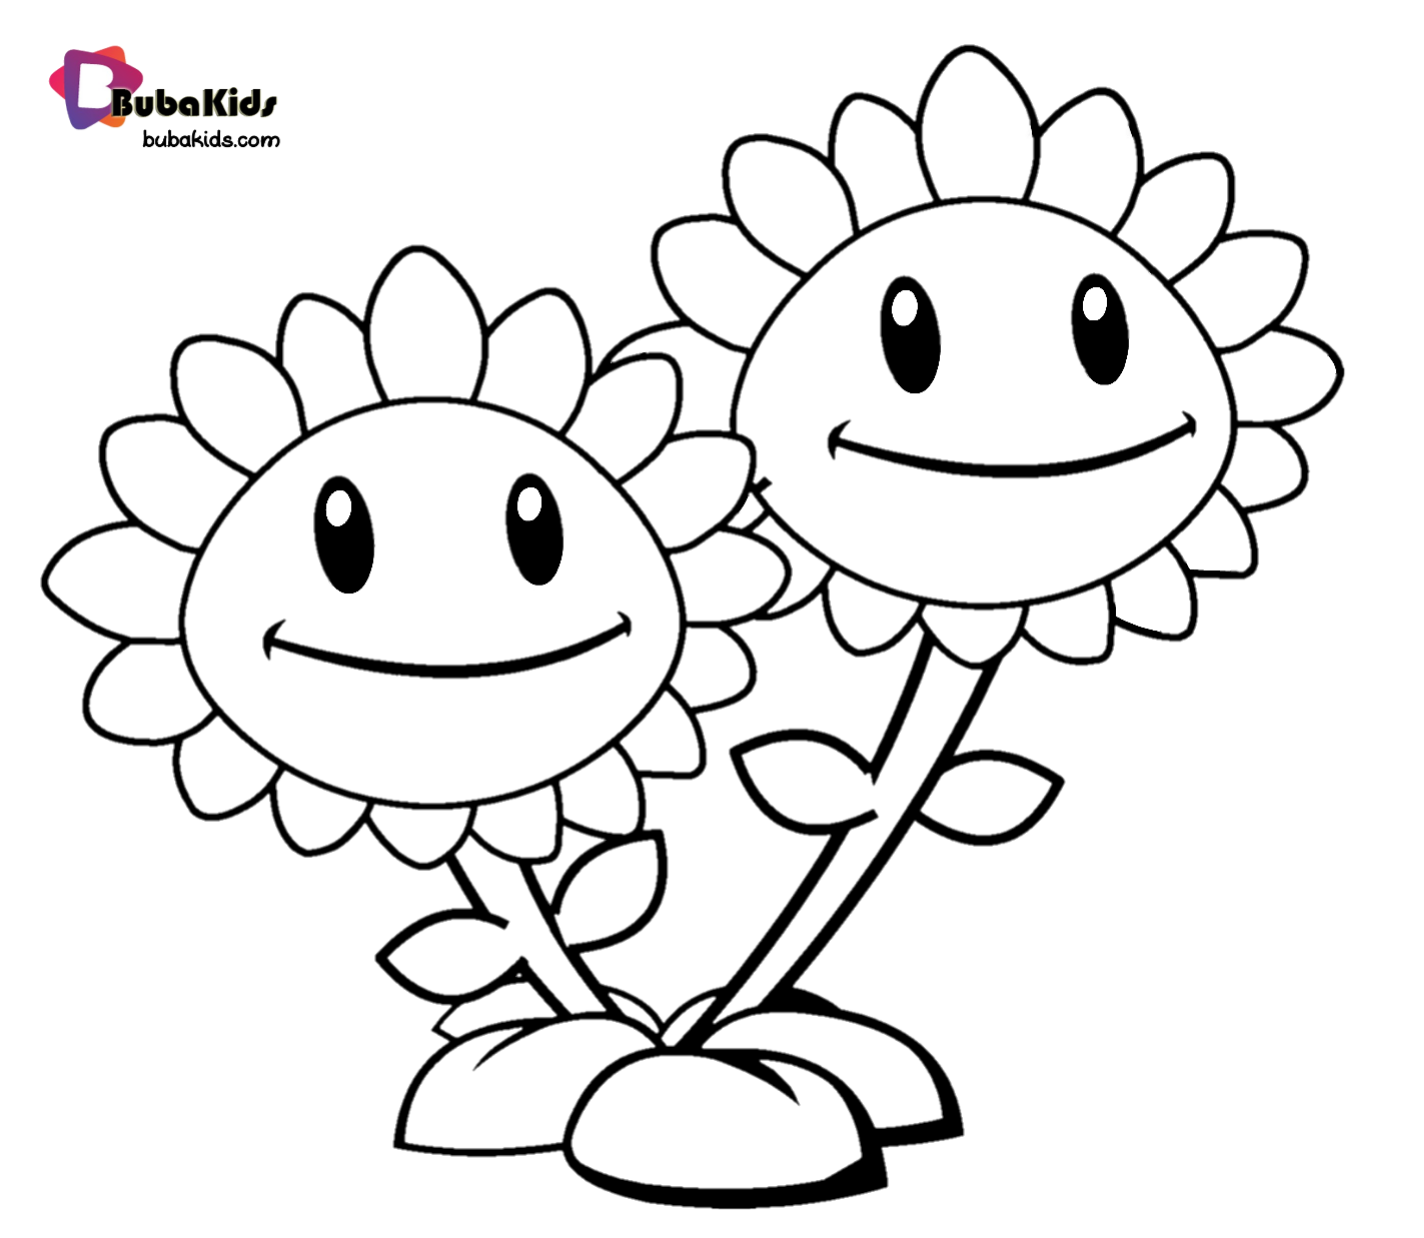 Cute sunflower coloring page for toddlers. Free and printable. Wallpaper